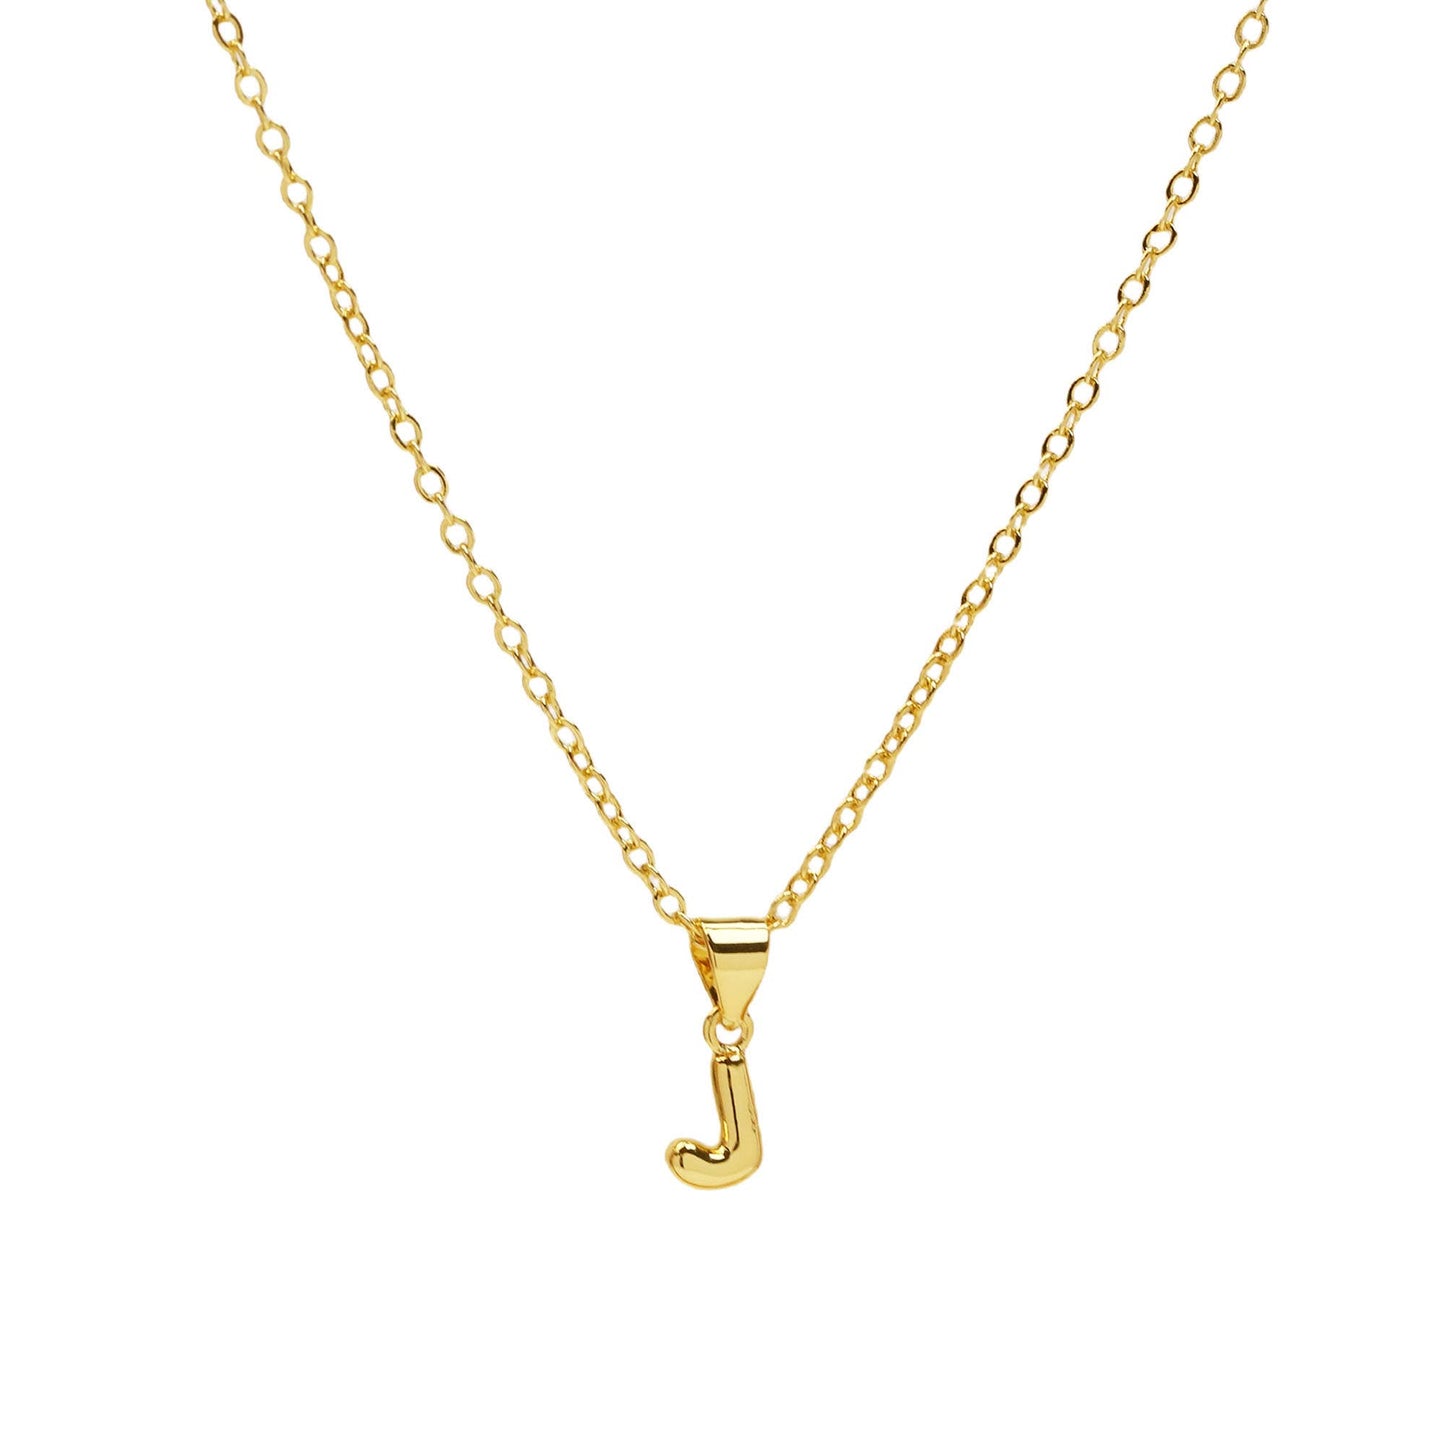 Initial Mini Balloon Bubble 18K Gold Necklace: H